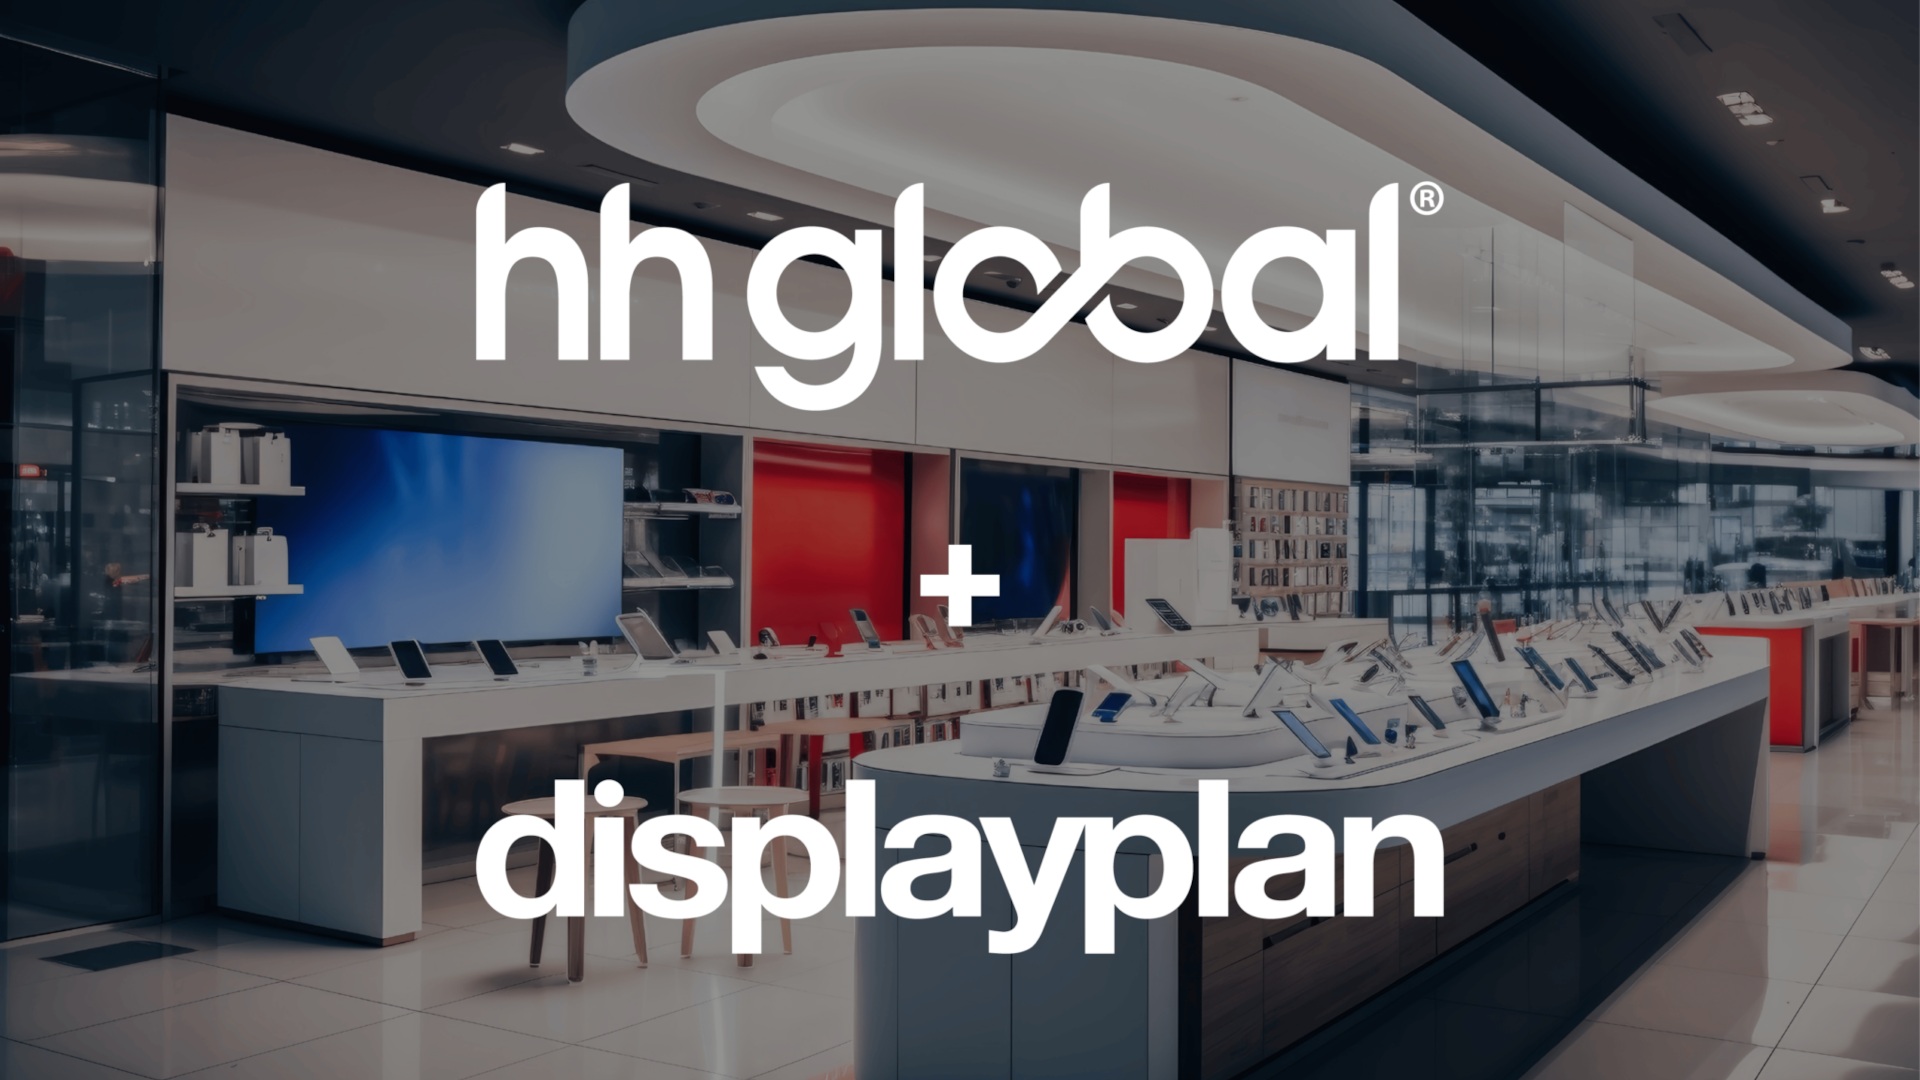 HH Global acquired Displayplan (Photo: HH Global)